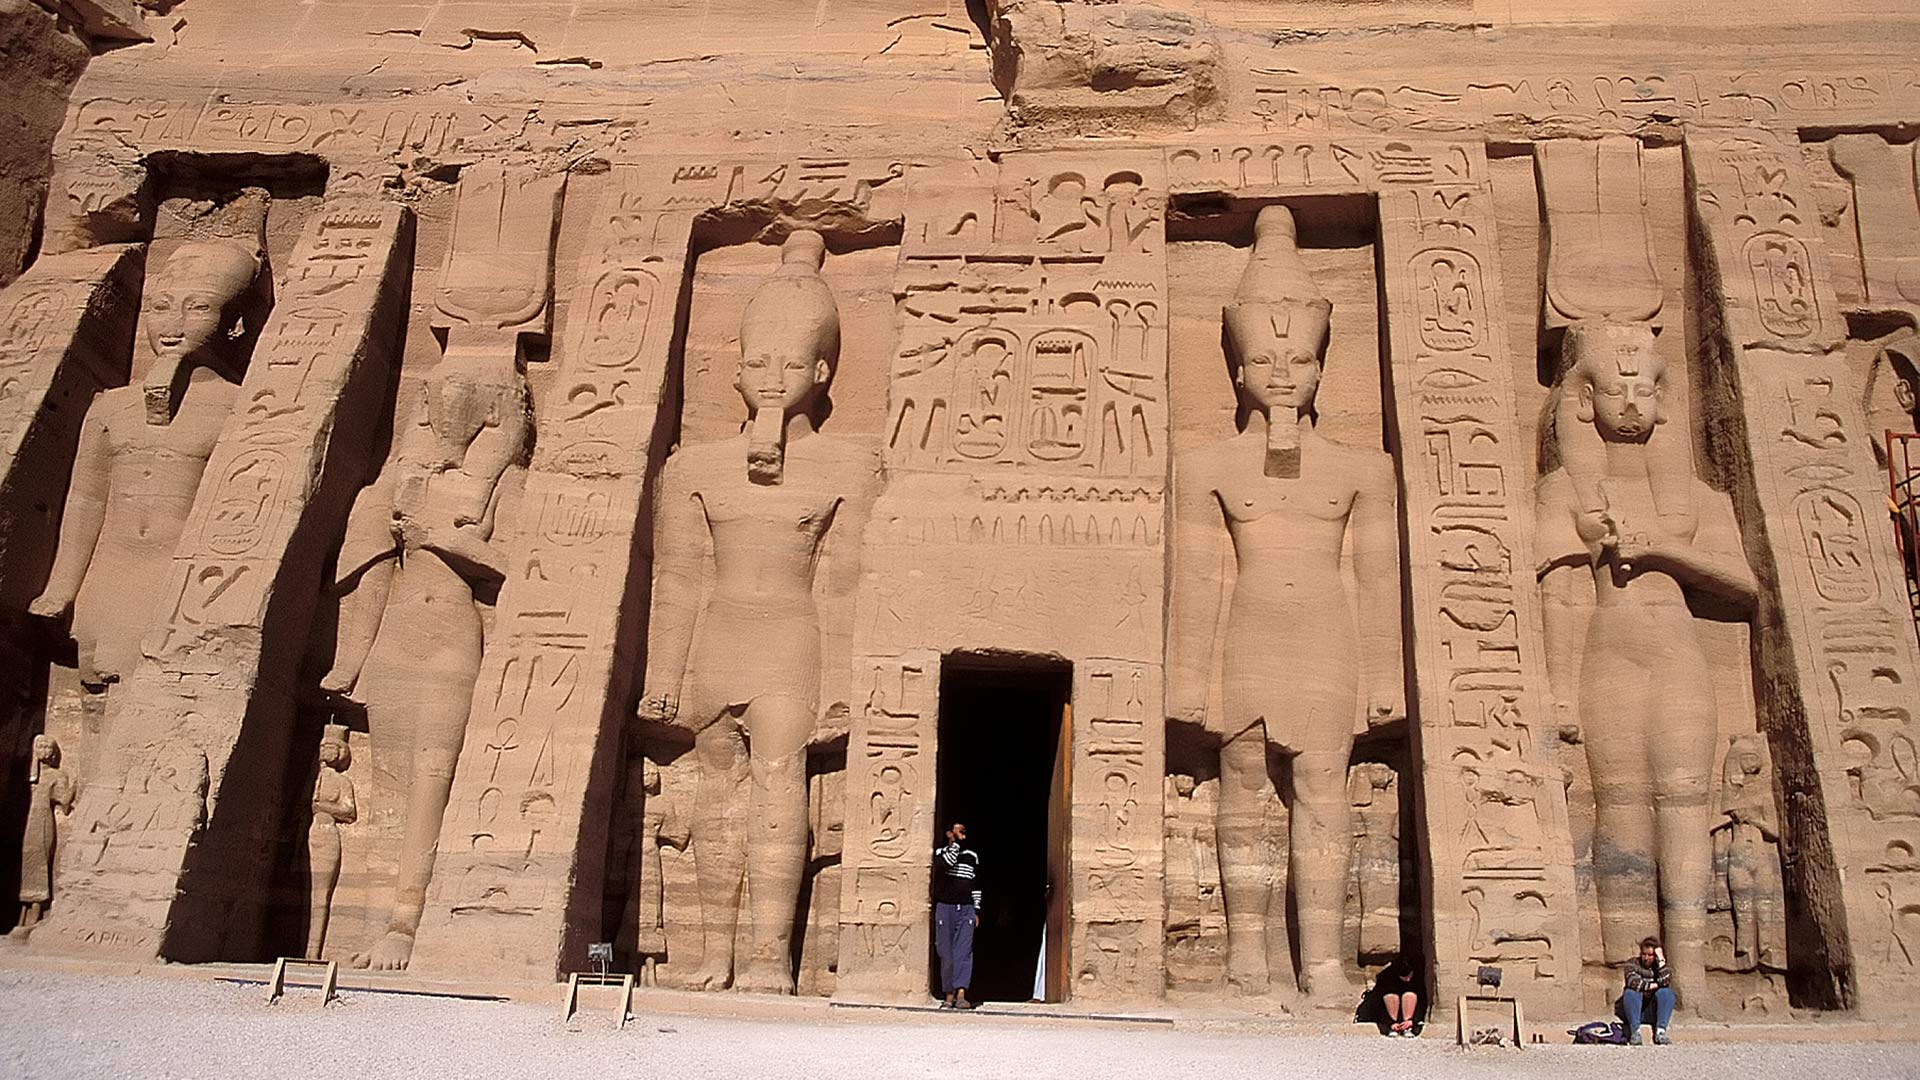 Tourist visiting Abu Simbel, the Great Temple of Ramesses II